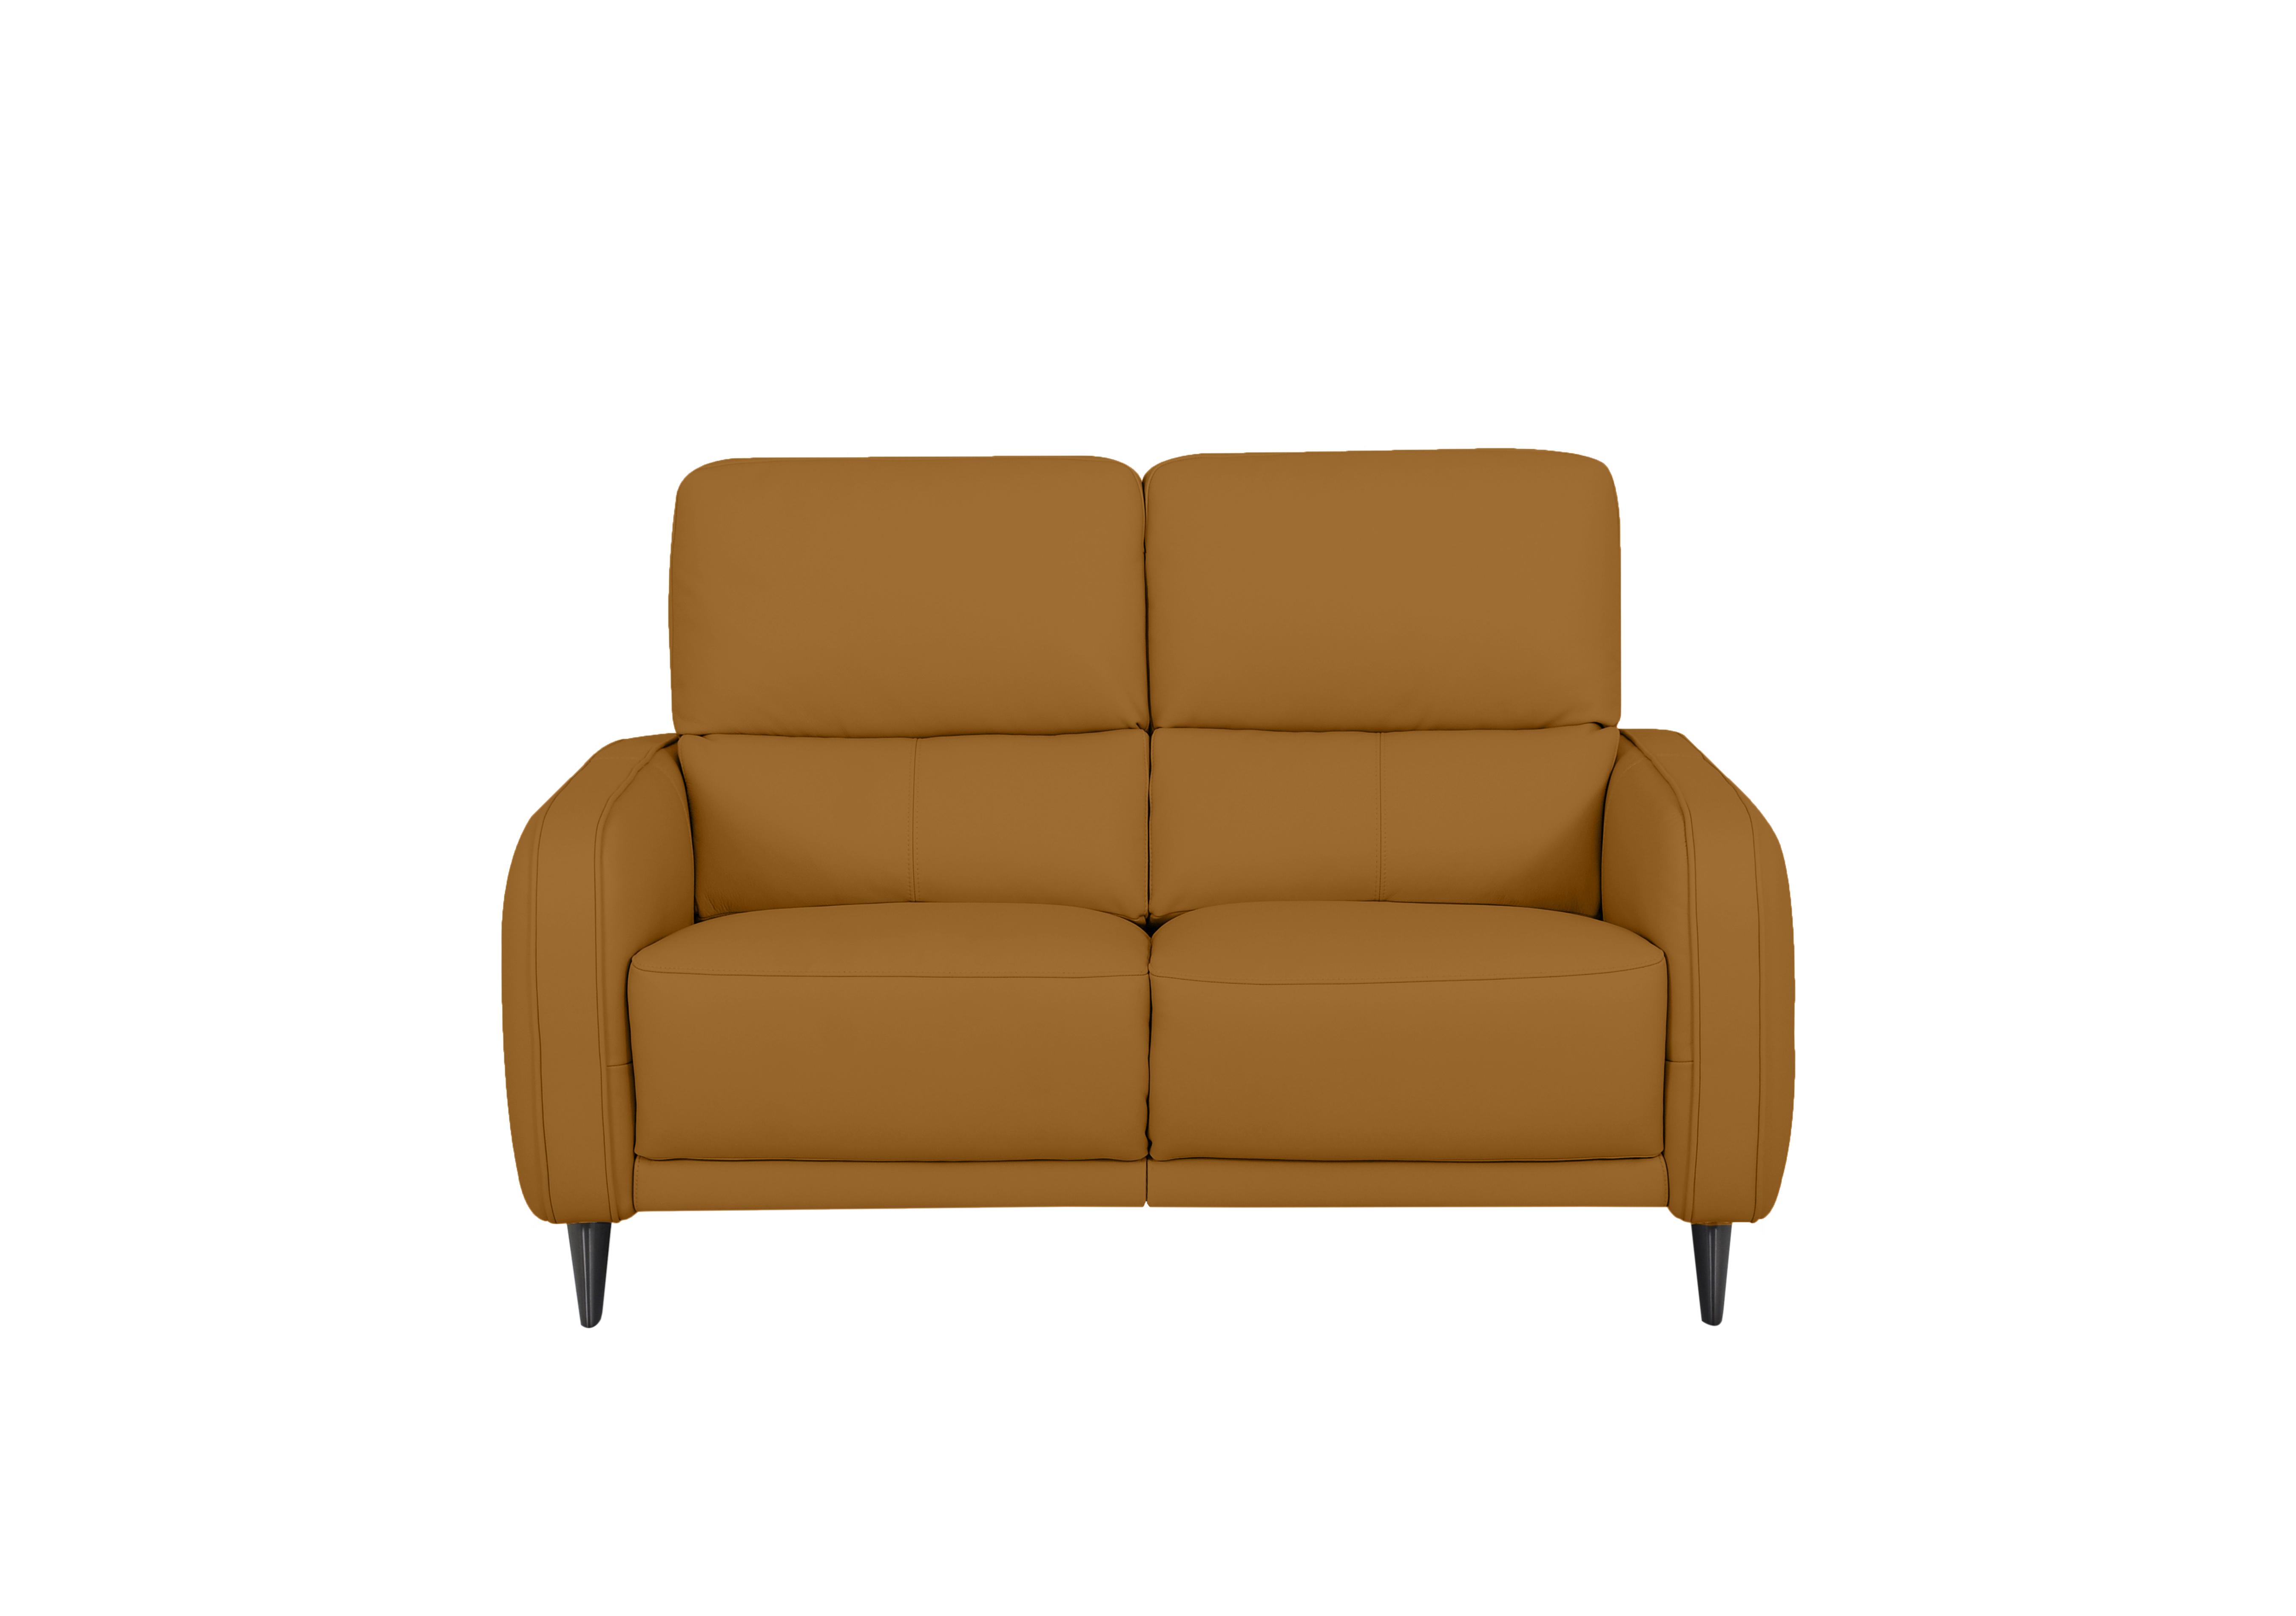 Logan 2 Seater Leather Sofa in Np-606e Honey Yellow on Furniture Village